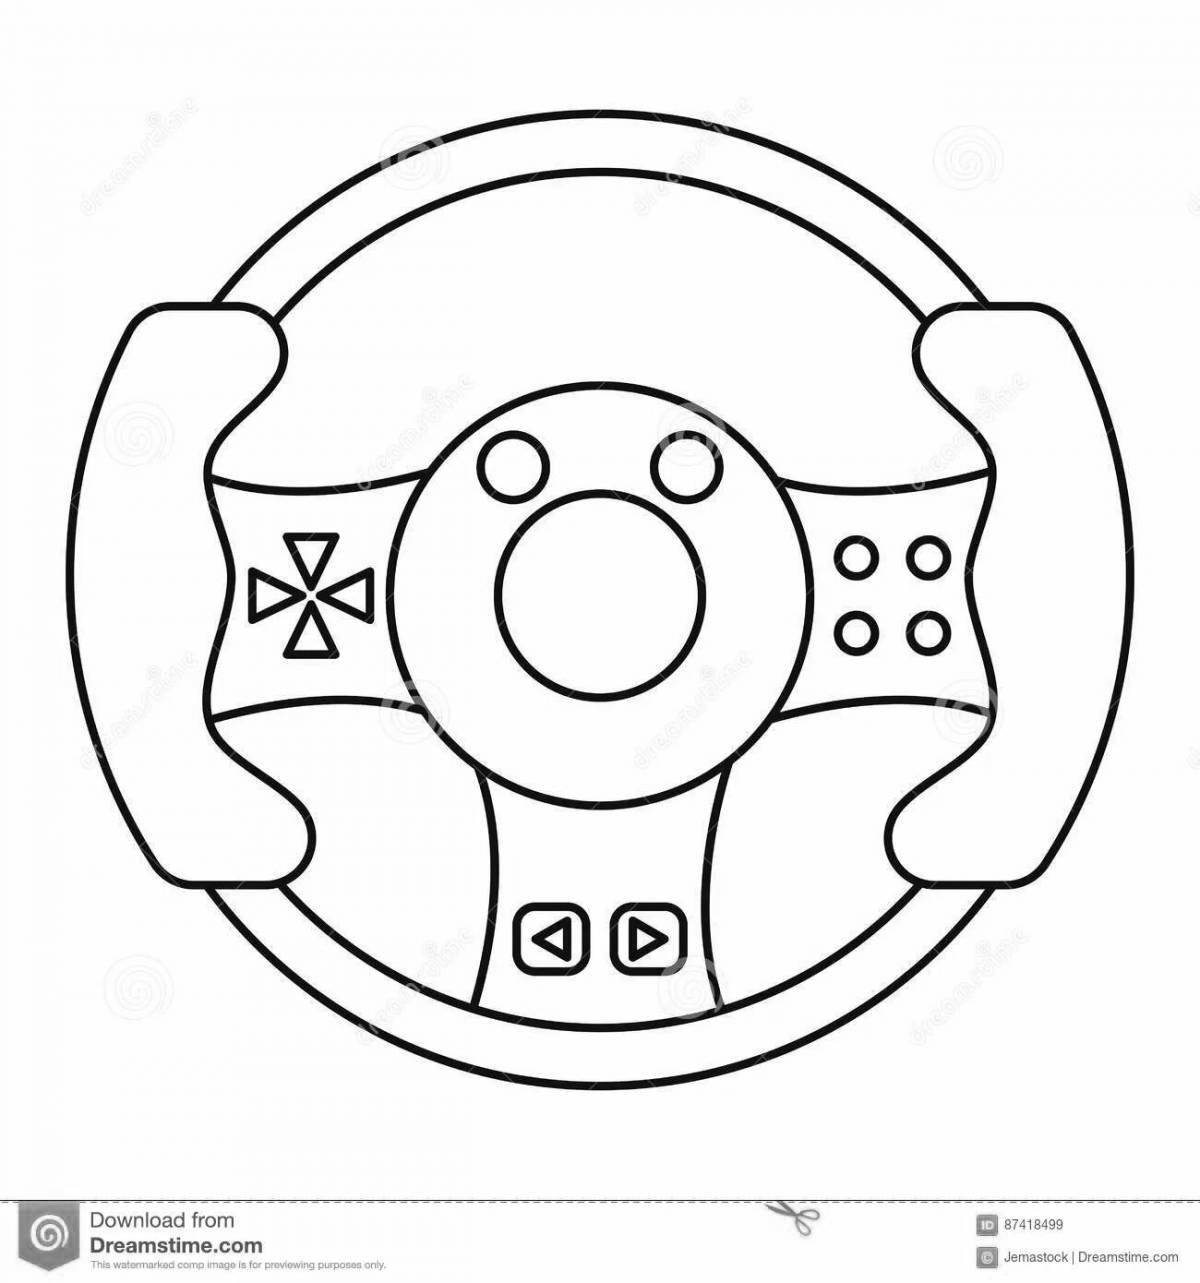 Animated steering wheel coloring page for kids